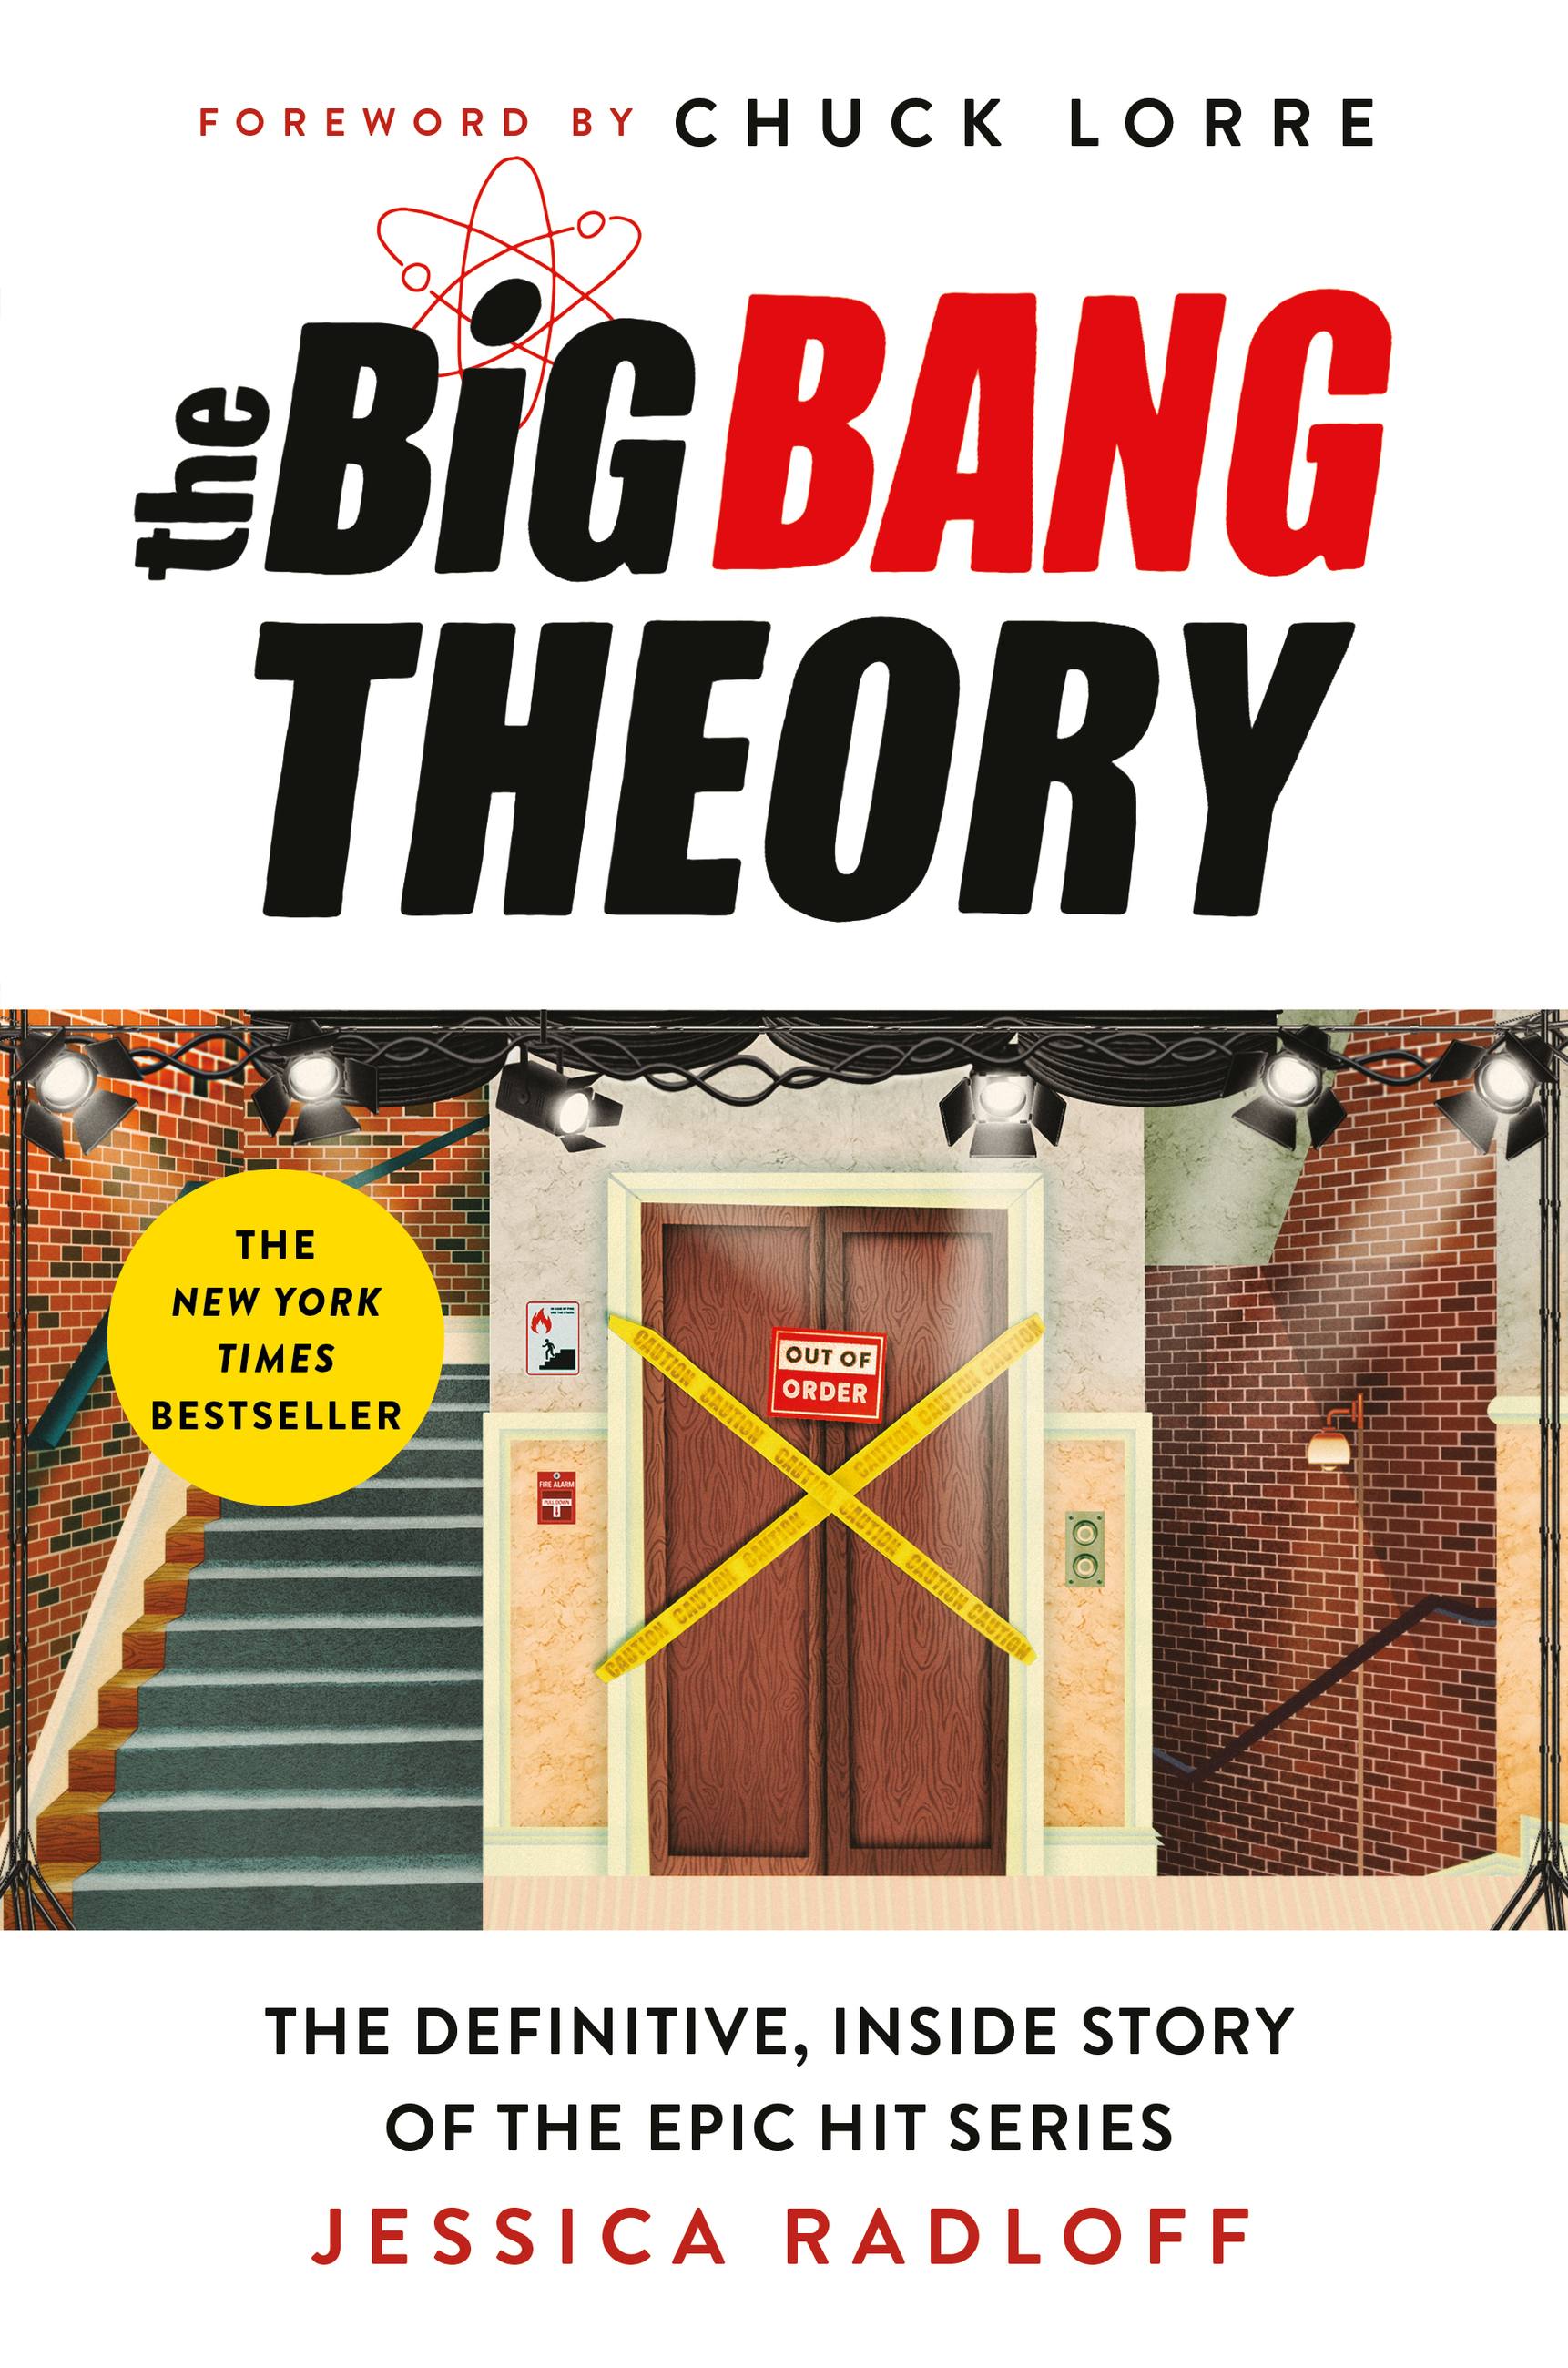 The　Hachette　Big　Theory　Bang　by　Jessica　Radloff　Book　Group